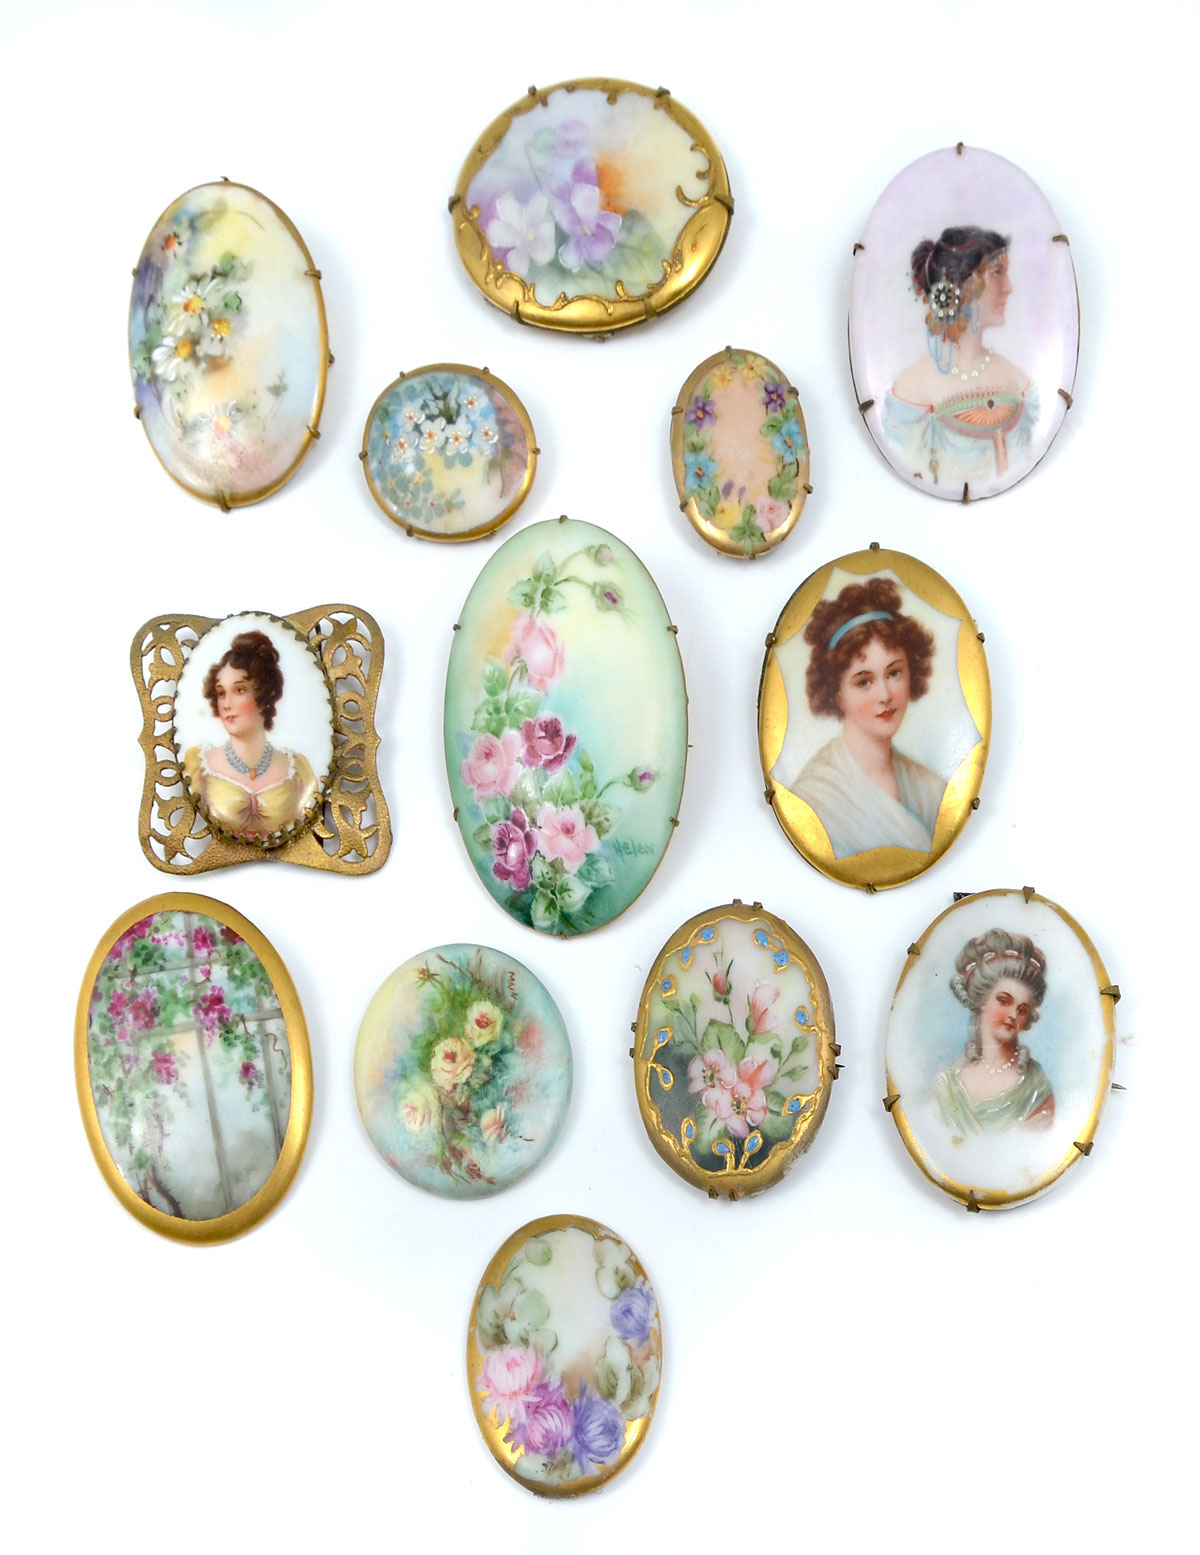 13 PAINTED PORCELAIN BROOCHES  36d298